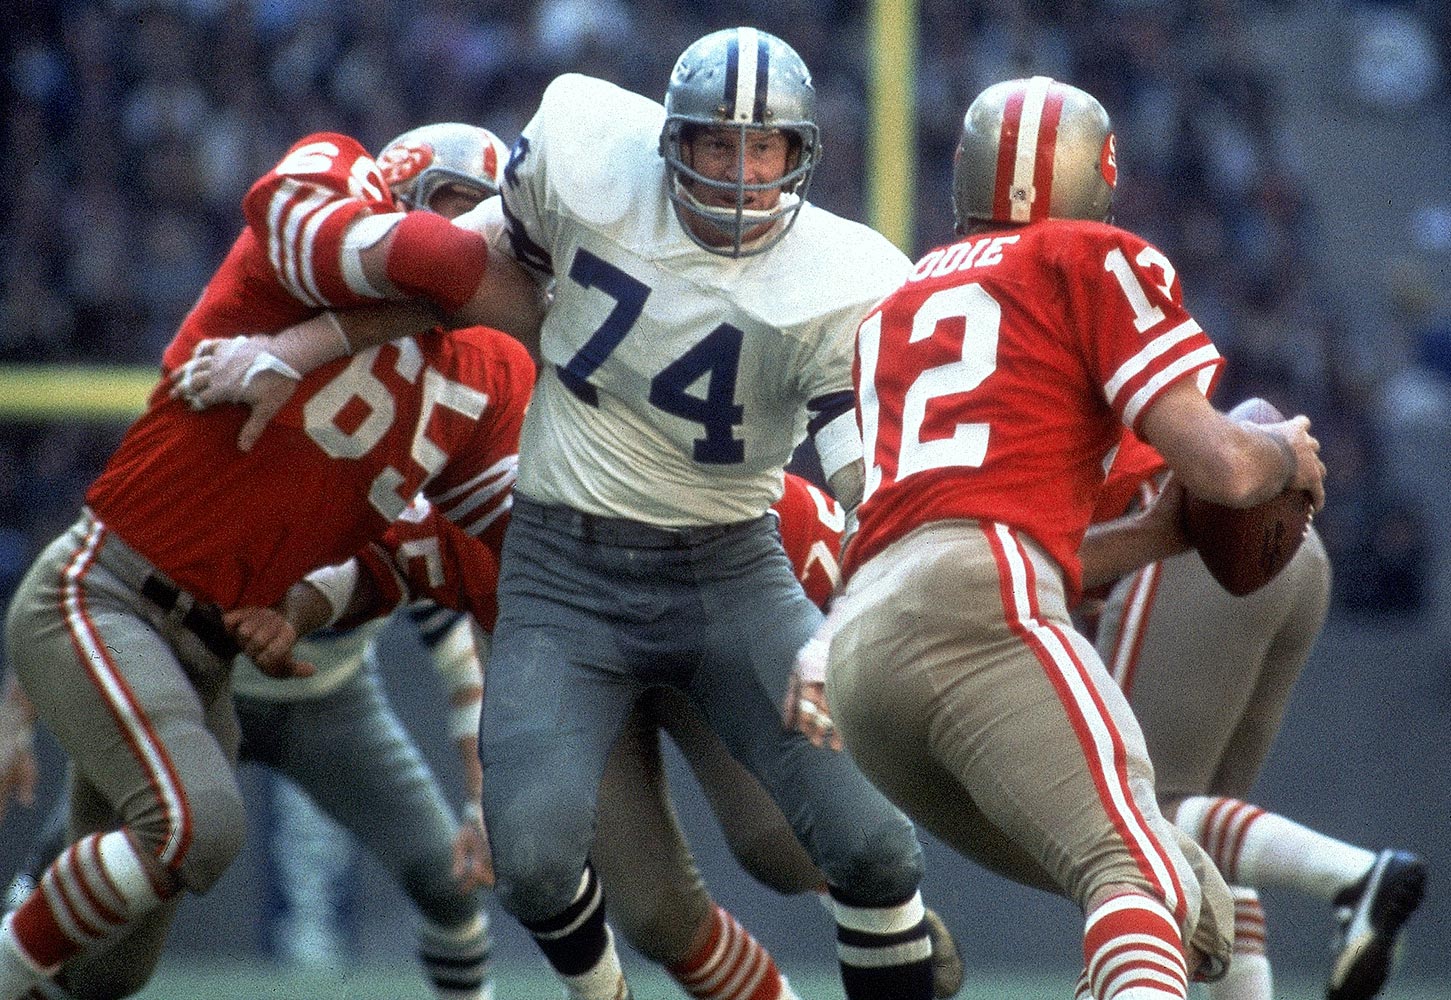 Cowboys Hall of Fame DT Bob Lilly shares memories from his time at TCU and being a part of the 60's & 70's Cowboys on this segment of Thursday Night Tailgate.